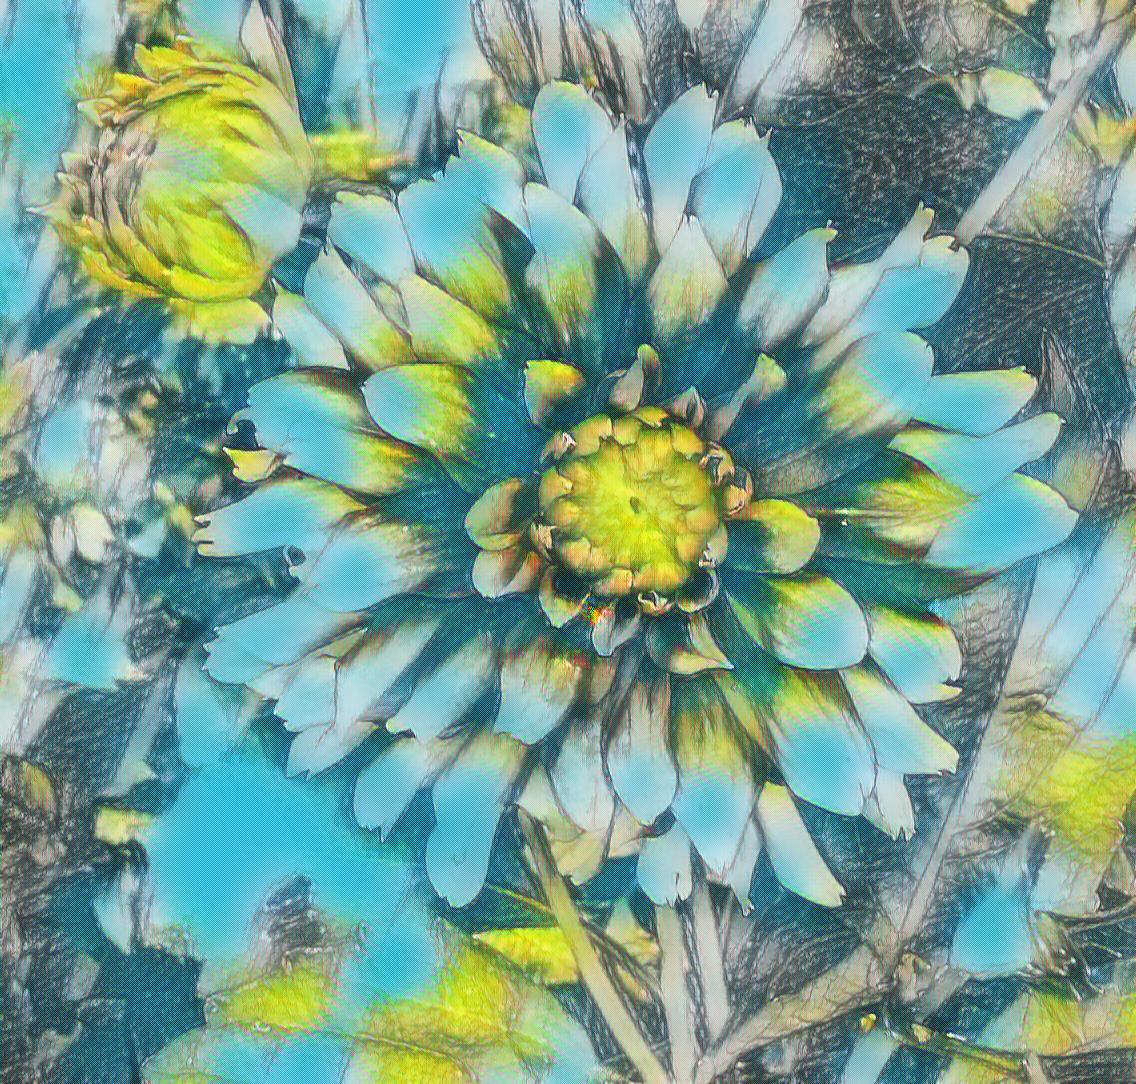 Photo of a dahlia taken by me with Sketch and Fantasy effects on LunaPic.com